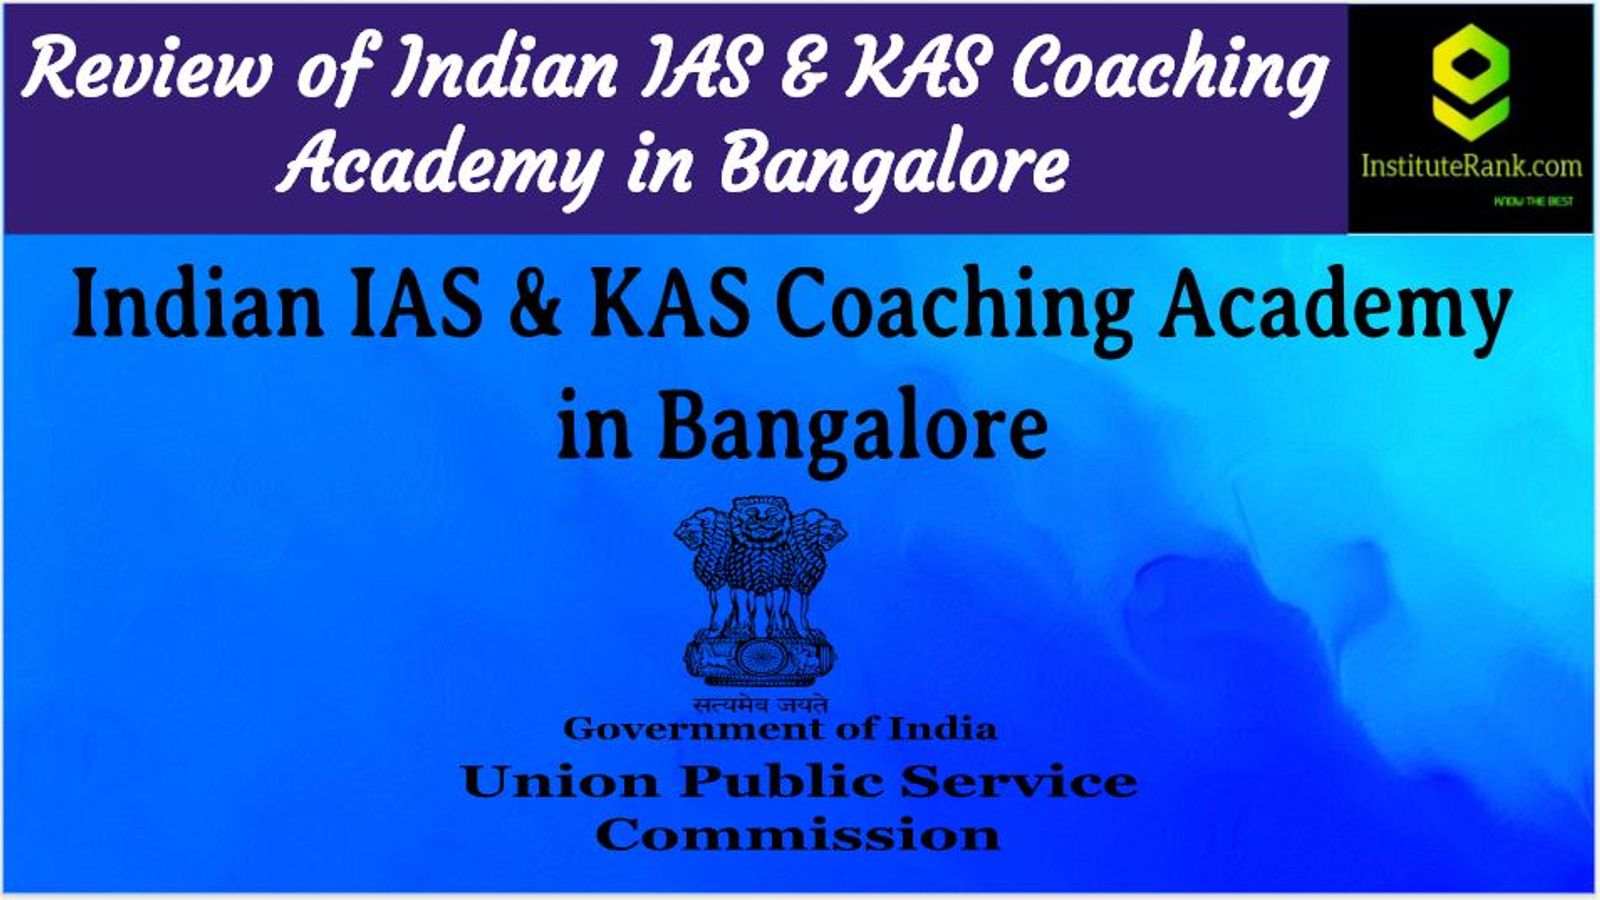 Indian IAS KAS Academy in Bangalore Review